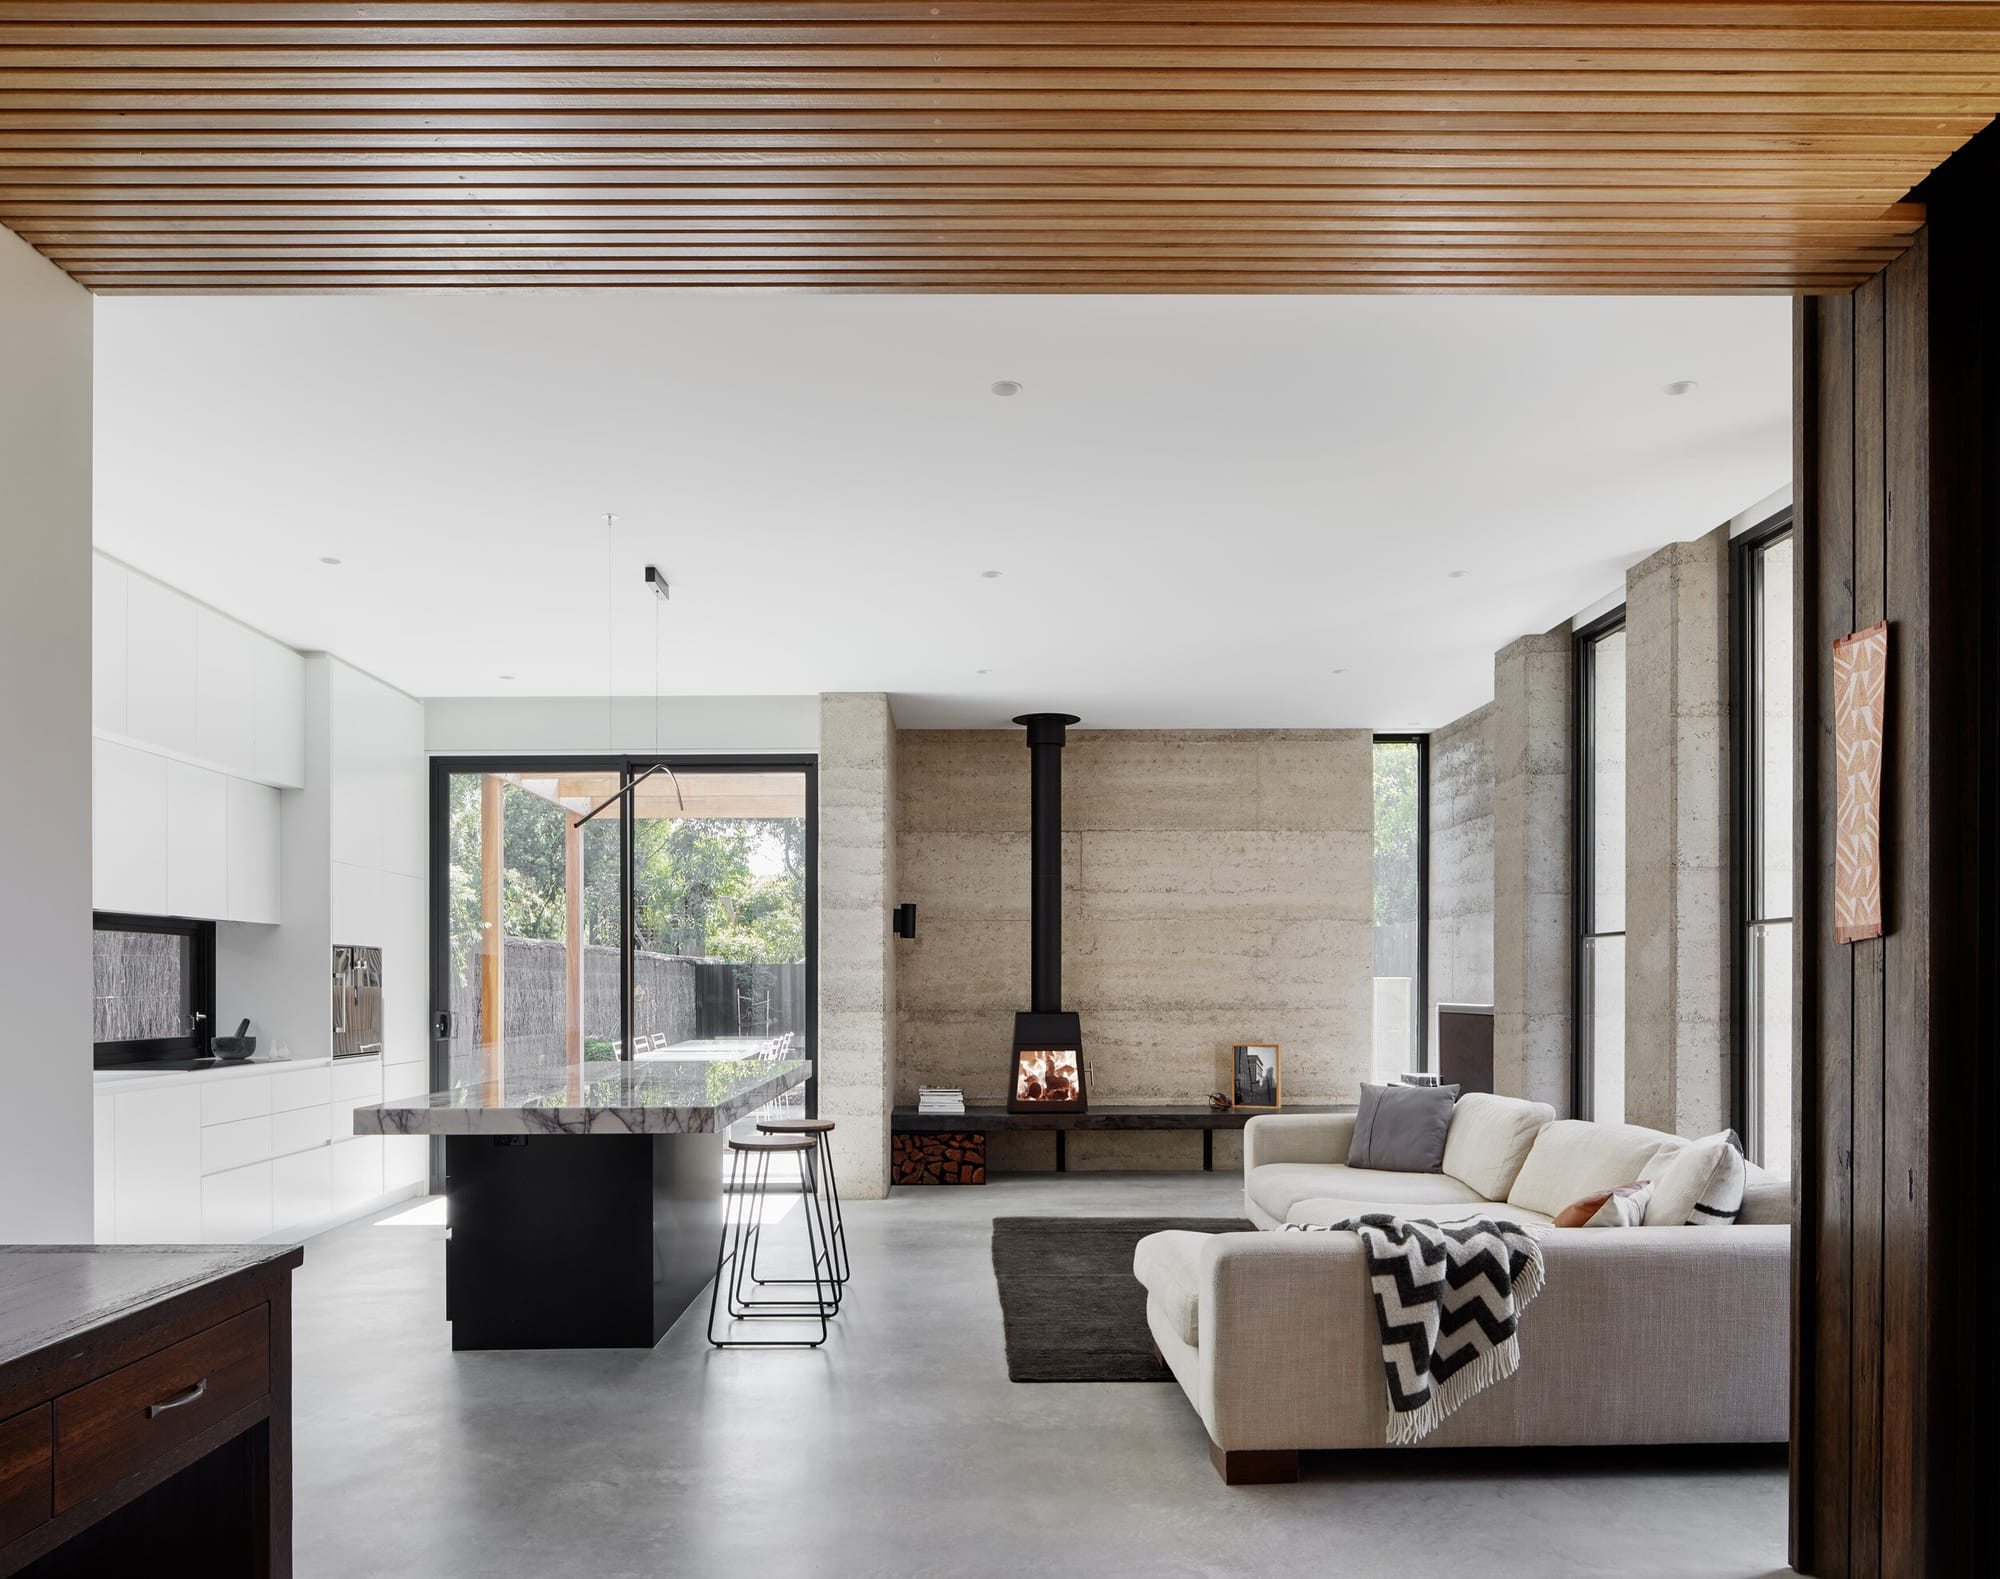 Laurel Grove by Kirsten Johnstone Architecture. Photography by Tatjana Plitt. Open plan living and kitchen space with concrete floors and rammed earth feature wall behind fireplace. 